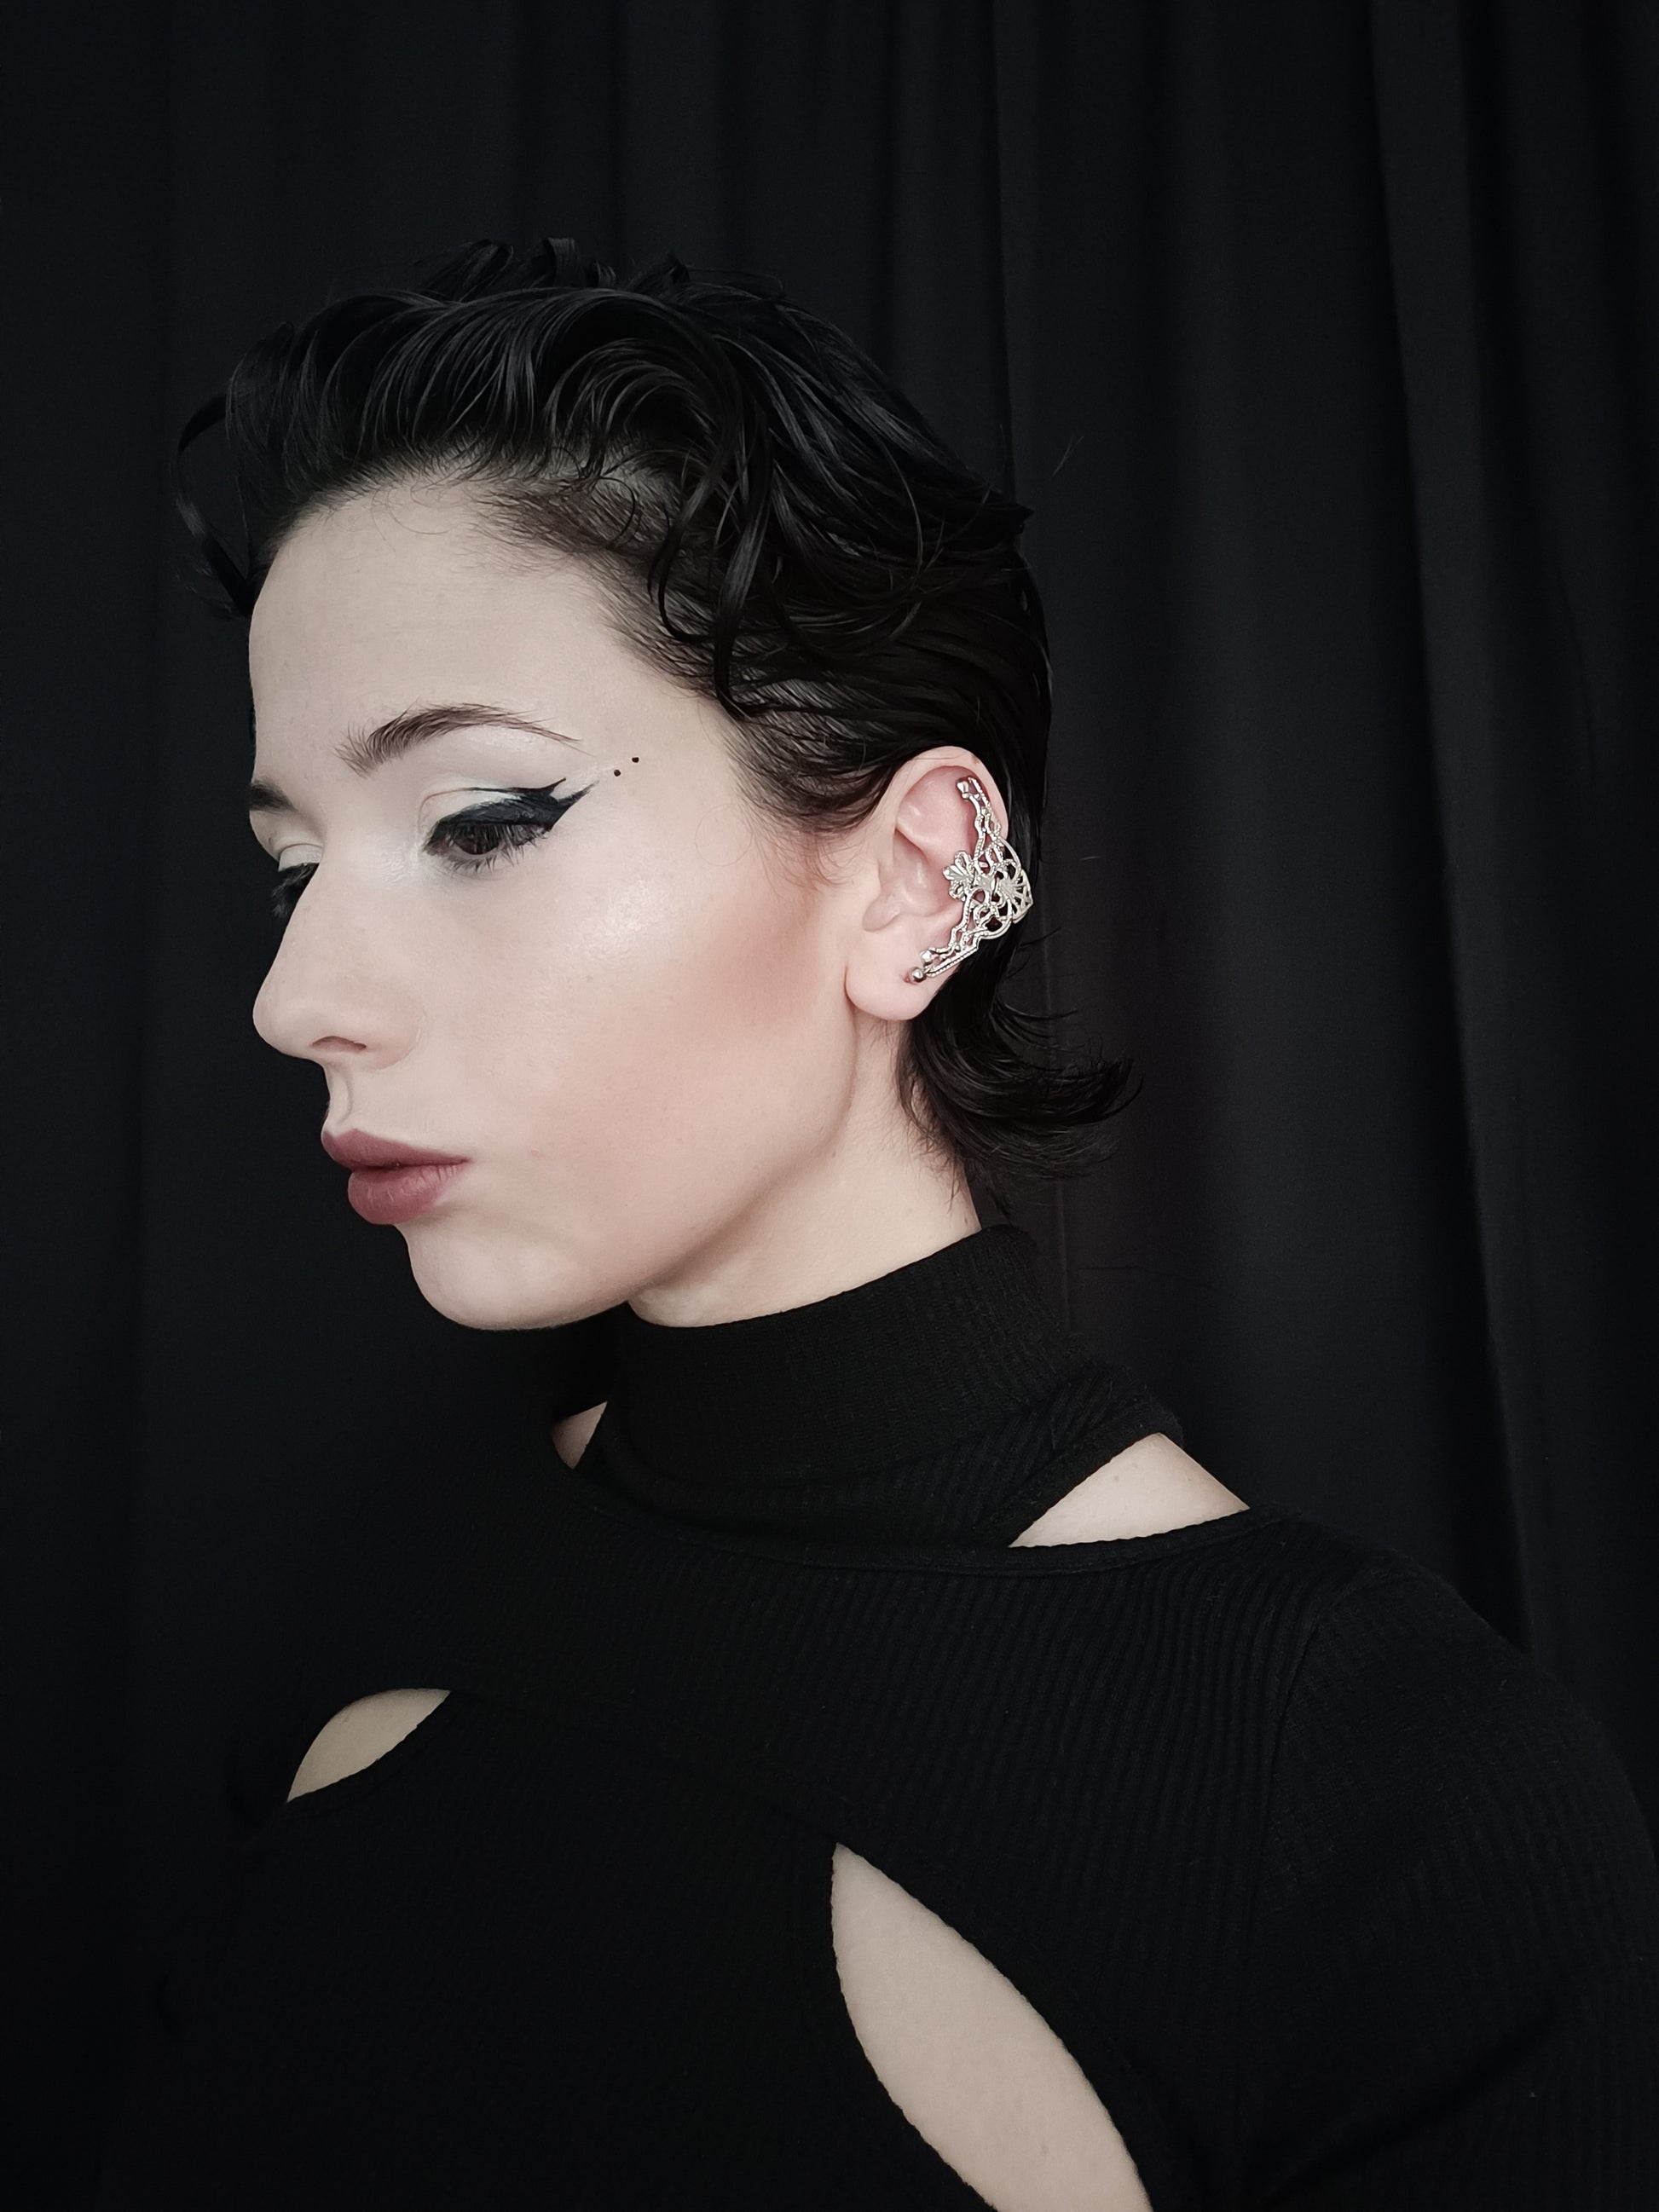 A profile view of a model wearing Myril Jewels cuff earrings, showcasing a neo-goth design with intricate filigree details. The earrings, resembling elegant gothic arches, complement the model's dark avant-garde style. This gothic-chic accessory is perfect for those embracing a whimsigoth or witchcore aesthetic, versatile enough for everyday wear, and striking for a Halloween or festival ensemble. The model's sleek hairstyle and bold eyeliner accentuate the earrings